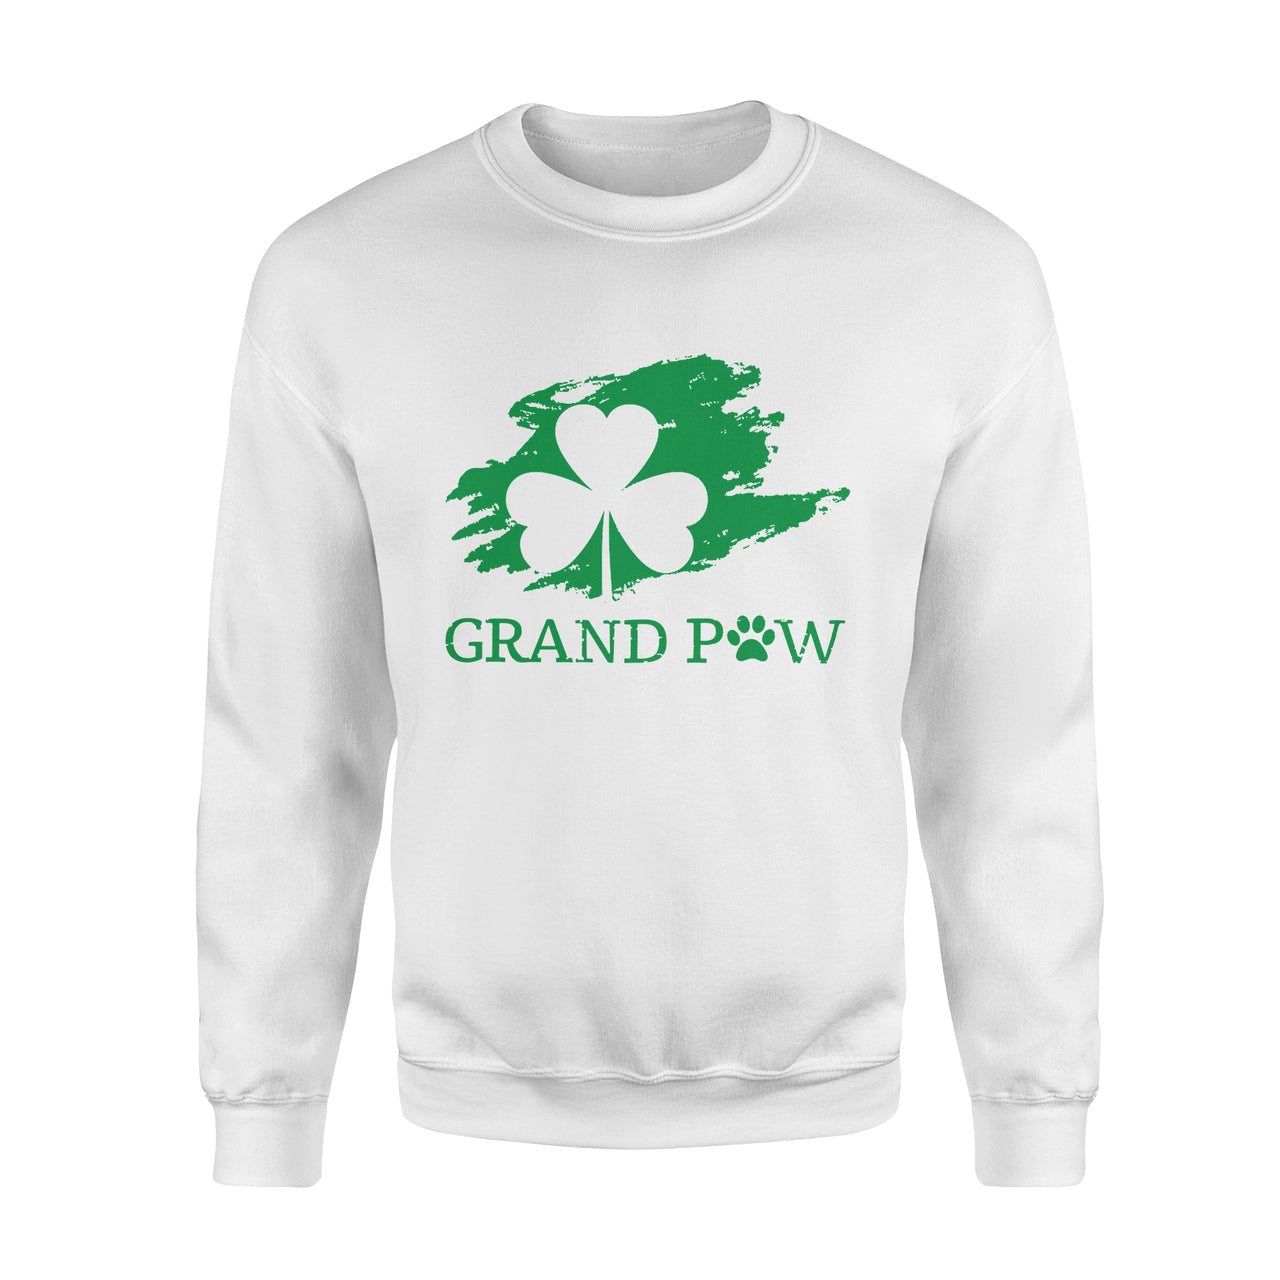 St Patrick's Day Gift Idea - Grand Paw For Dog Lovers - Standard Crew Neck Sweatshirt